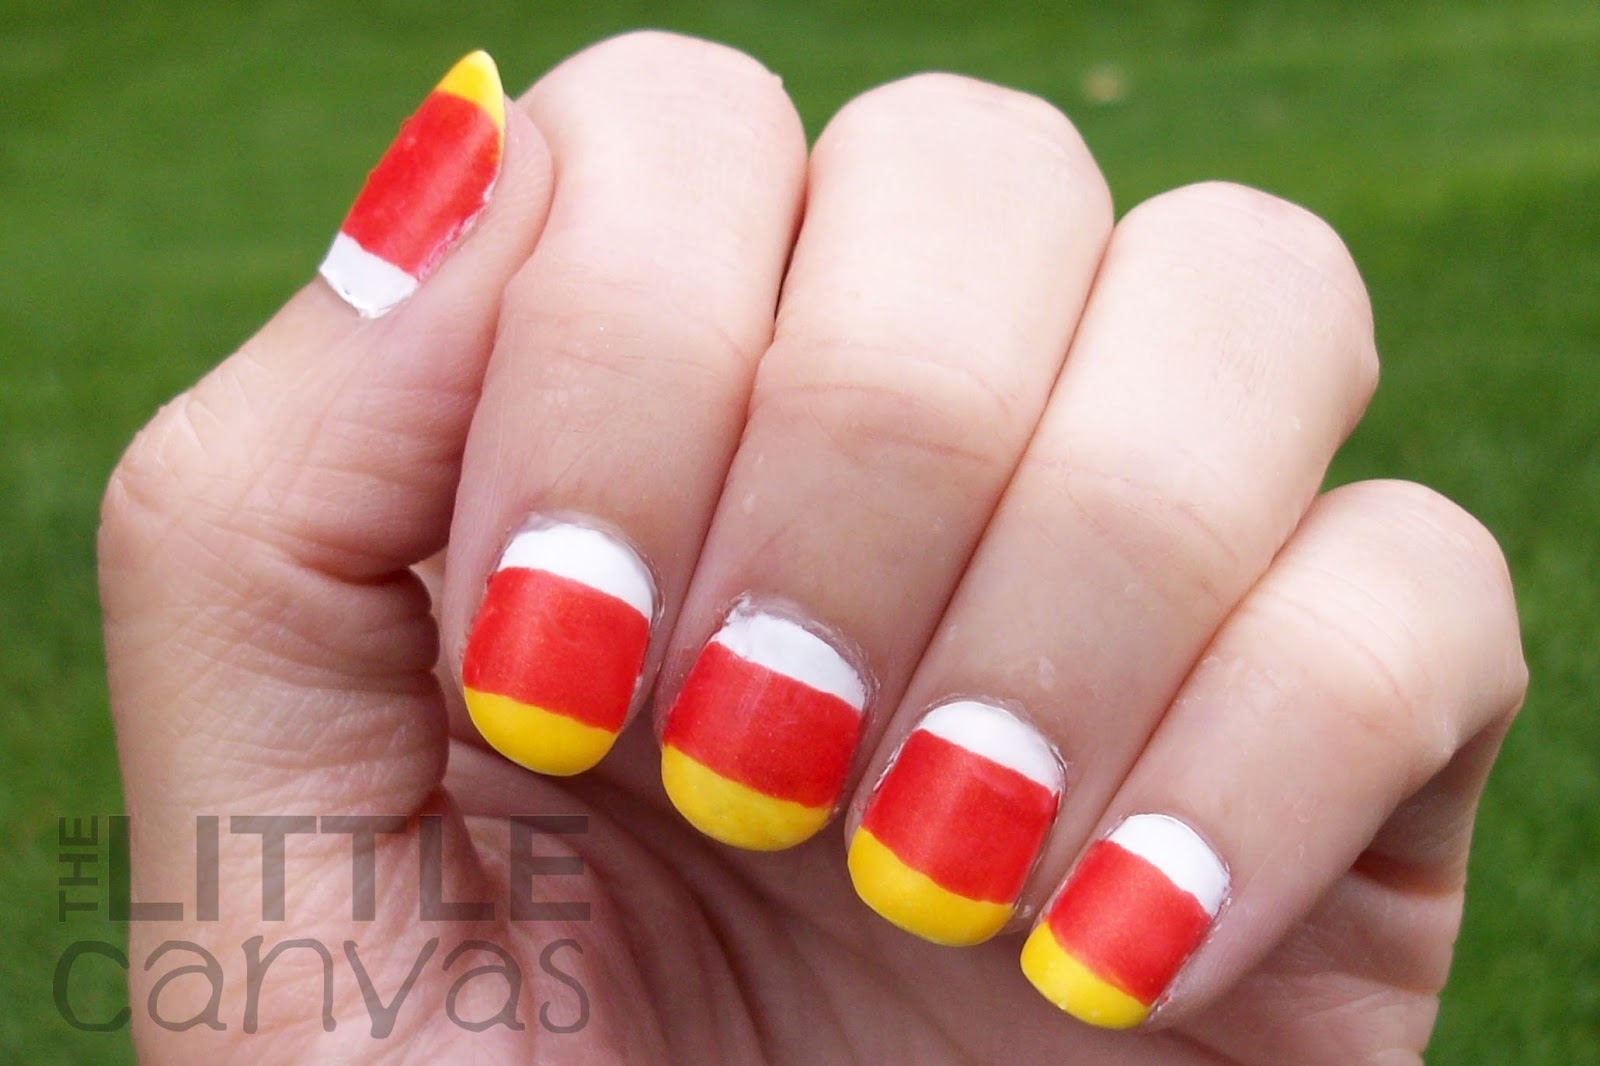 2. Easy Candy Corn Nail Design - wide 4